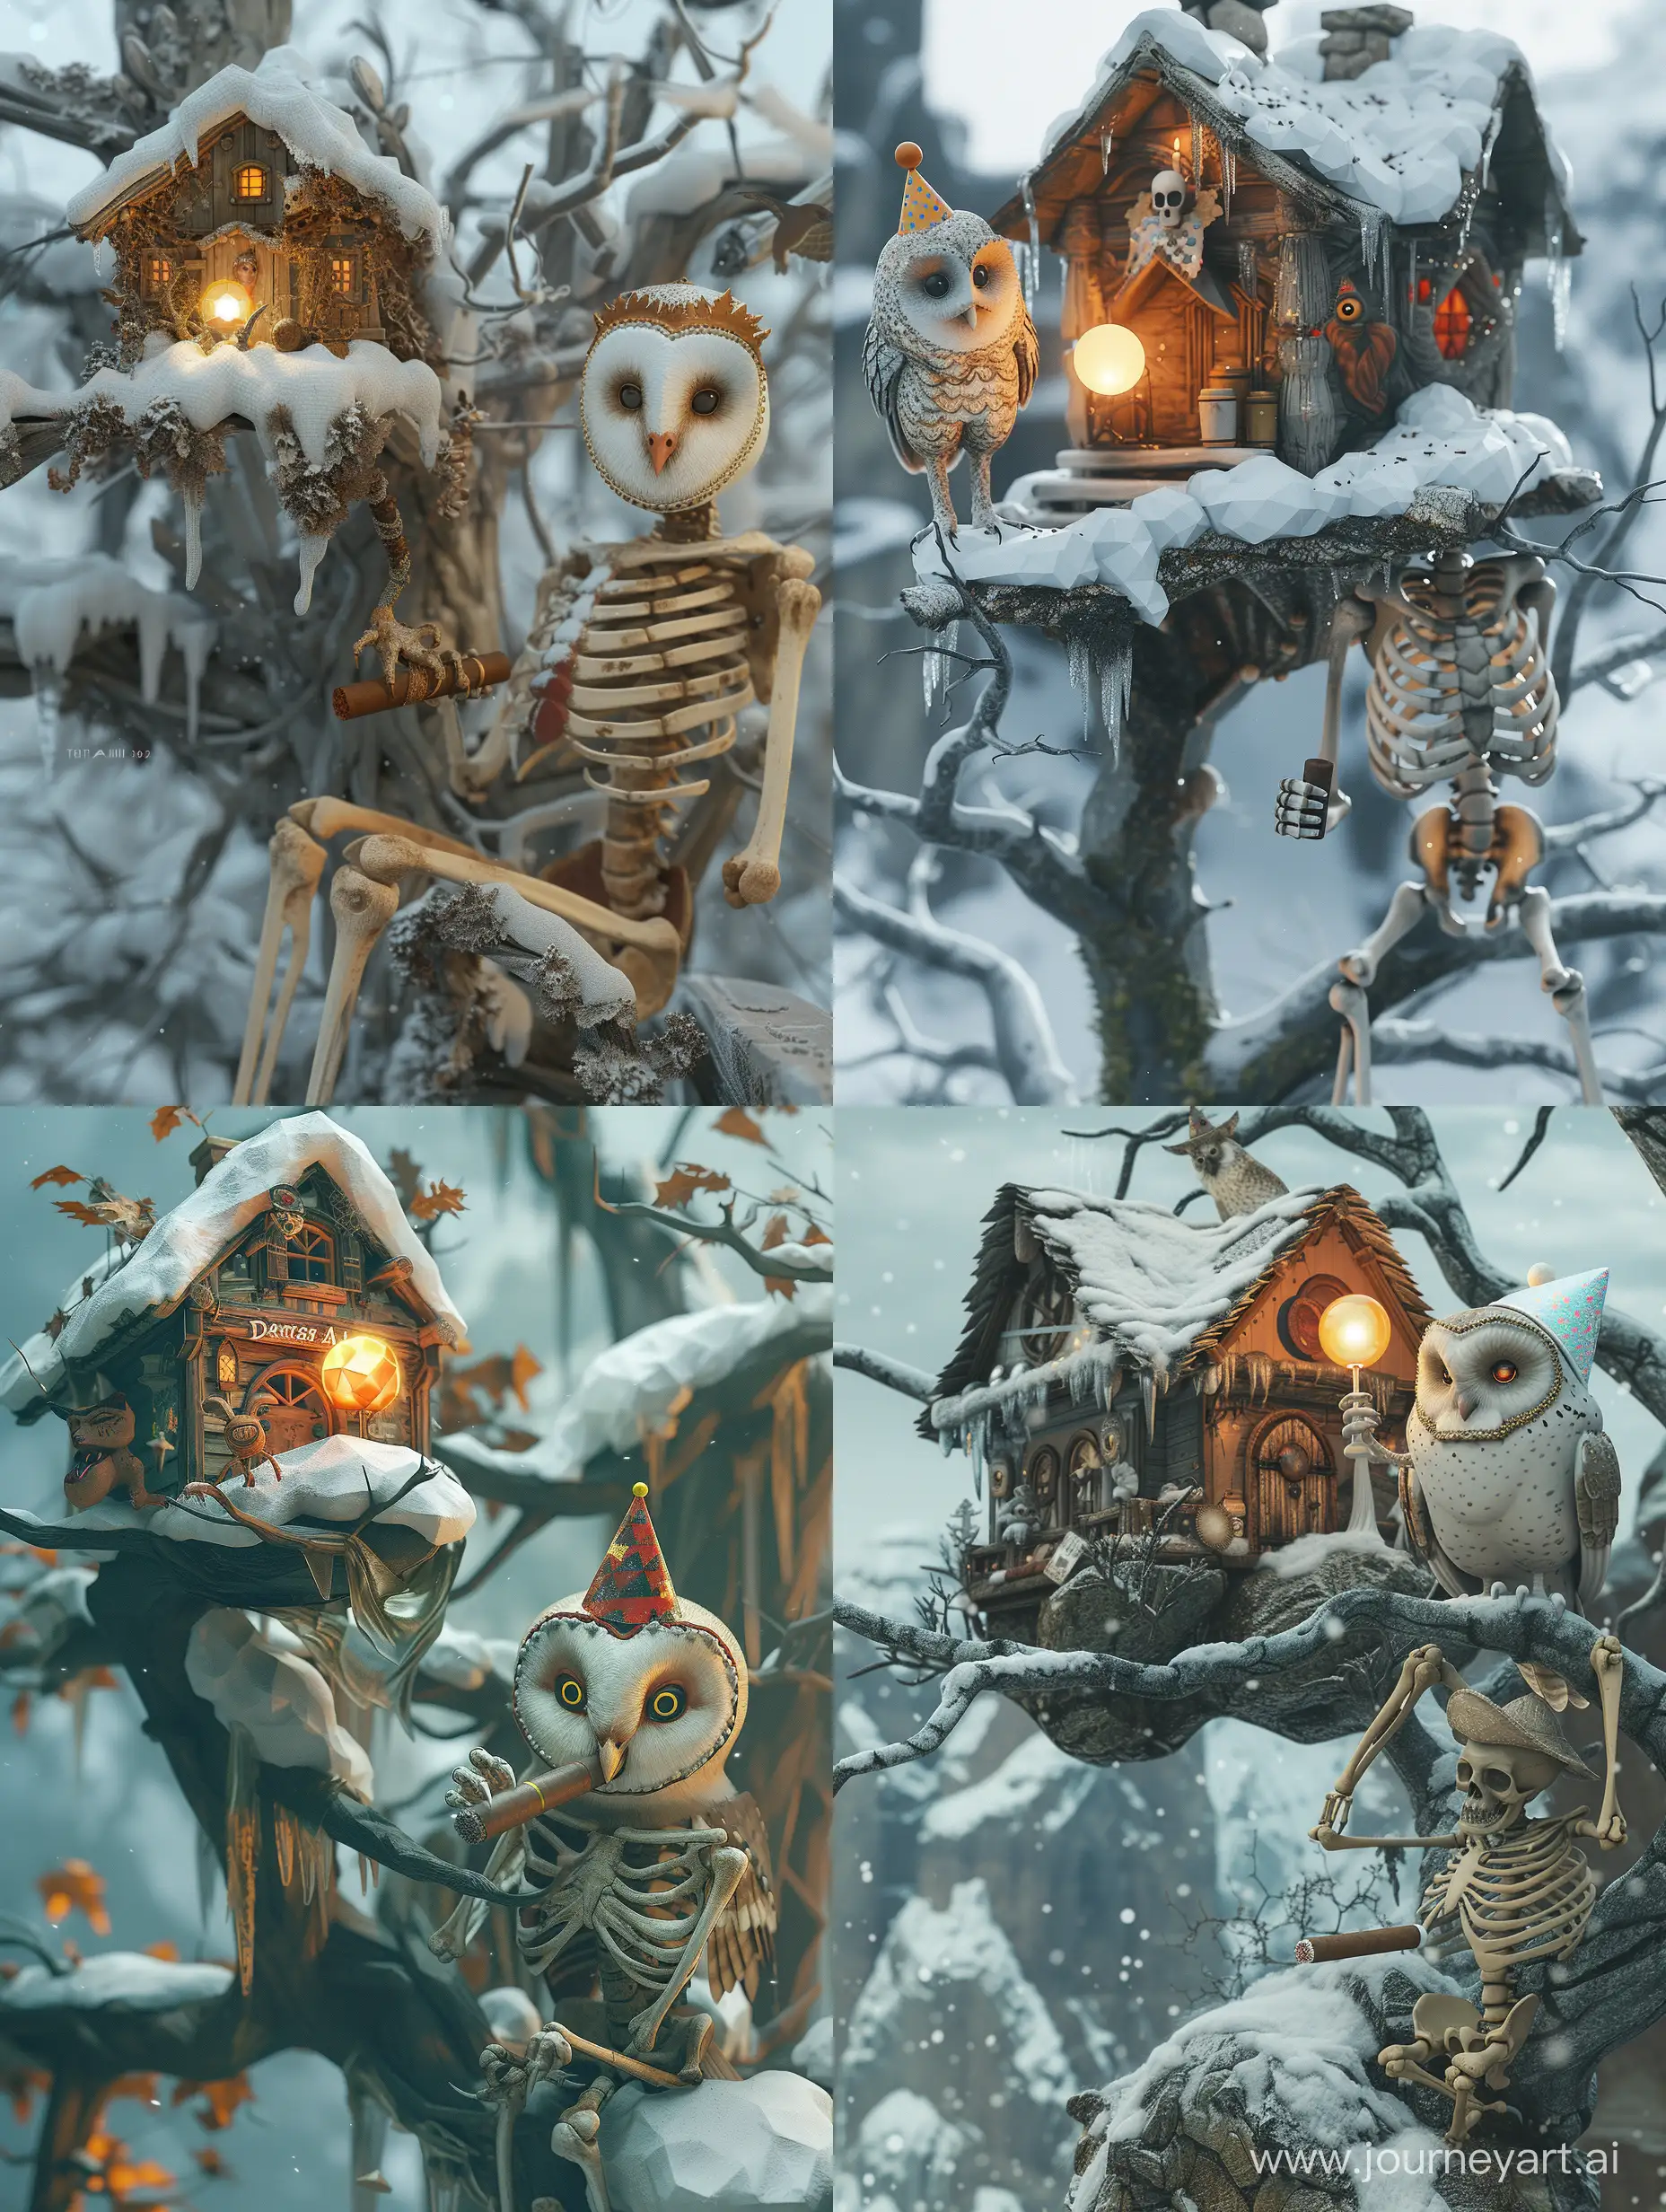 "Dwarves' house perched on a snow-covered branching tree in a low poly style, with a cyberpunk art twist. Feature a digital painting of an owl holding a glowing ball, rendered in the style of Tomas Alain Opera, with fantasy art elements. Add a textured, detailed skeleton evoking a sitting demon, reminiscent of biple art and shamanic witch aesthetics. Additionally, include an owl wearing a birthday cap and holding a cigar, inspired by the Hasselblad HC 100mm f/2.2 style, with Farm Security Administration aesthetics and Pop Art sensibilities. The image should also incorporate animated gifs, Irving Penn's influence, and close-up details, akin to the work of David Yarrow" s 1000